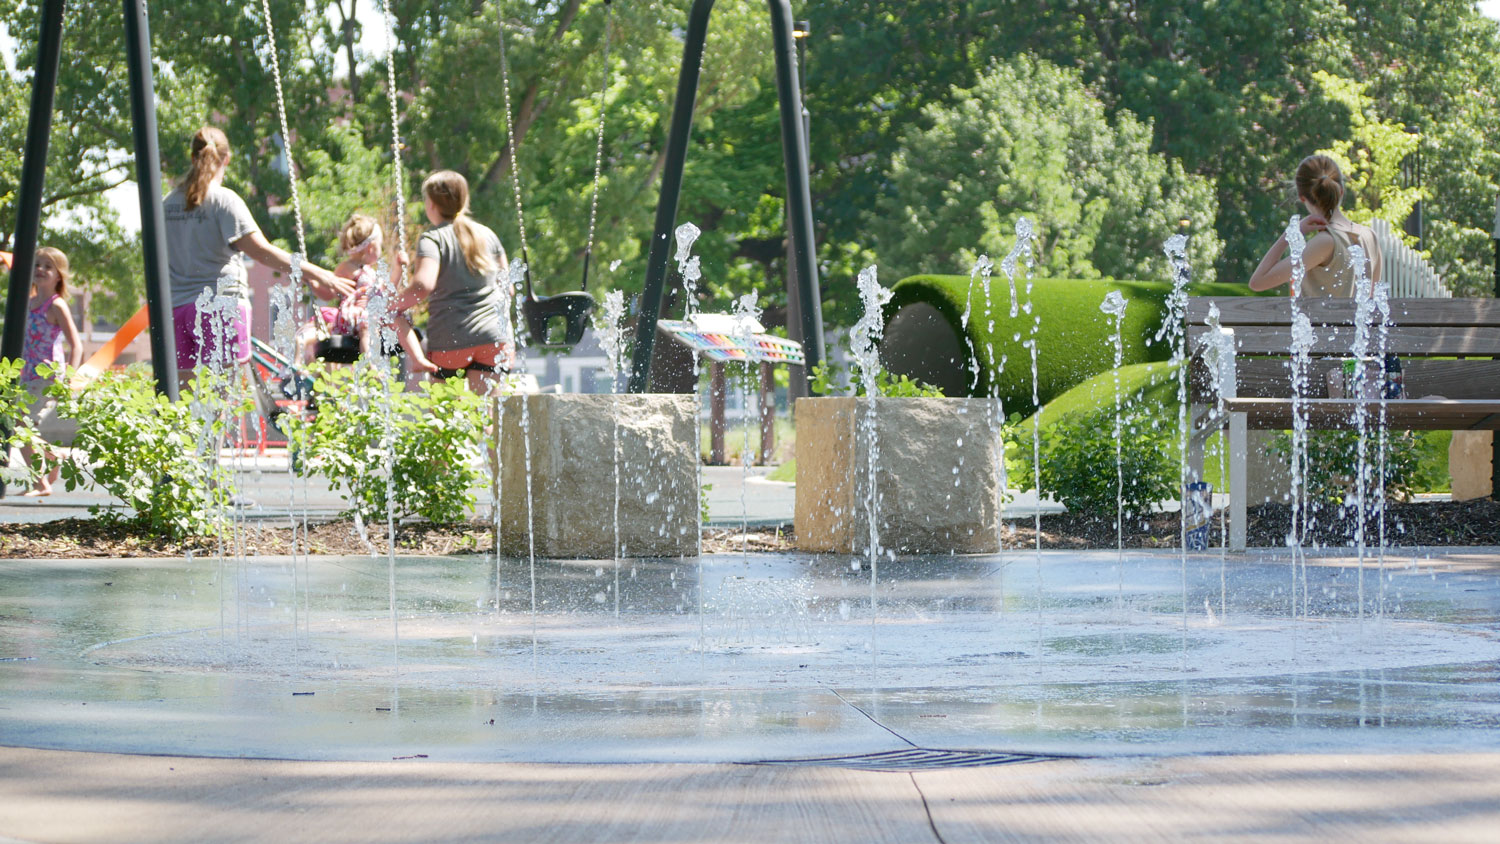 This is an image of downtown overland park thompson splash pad cu web